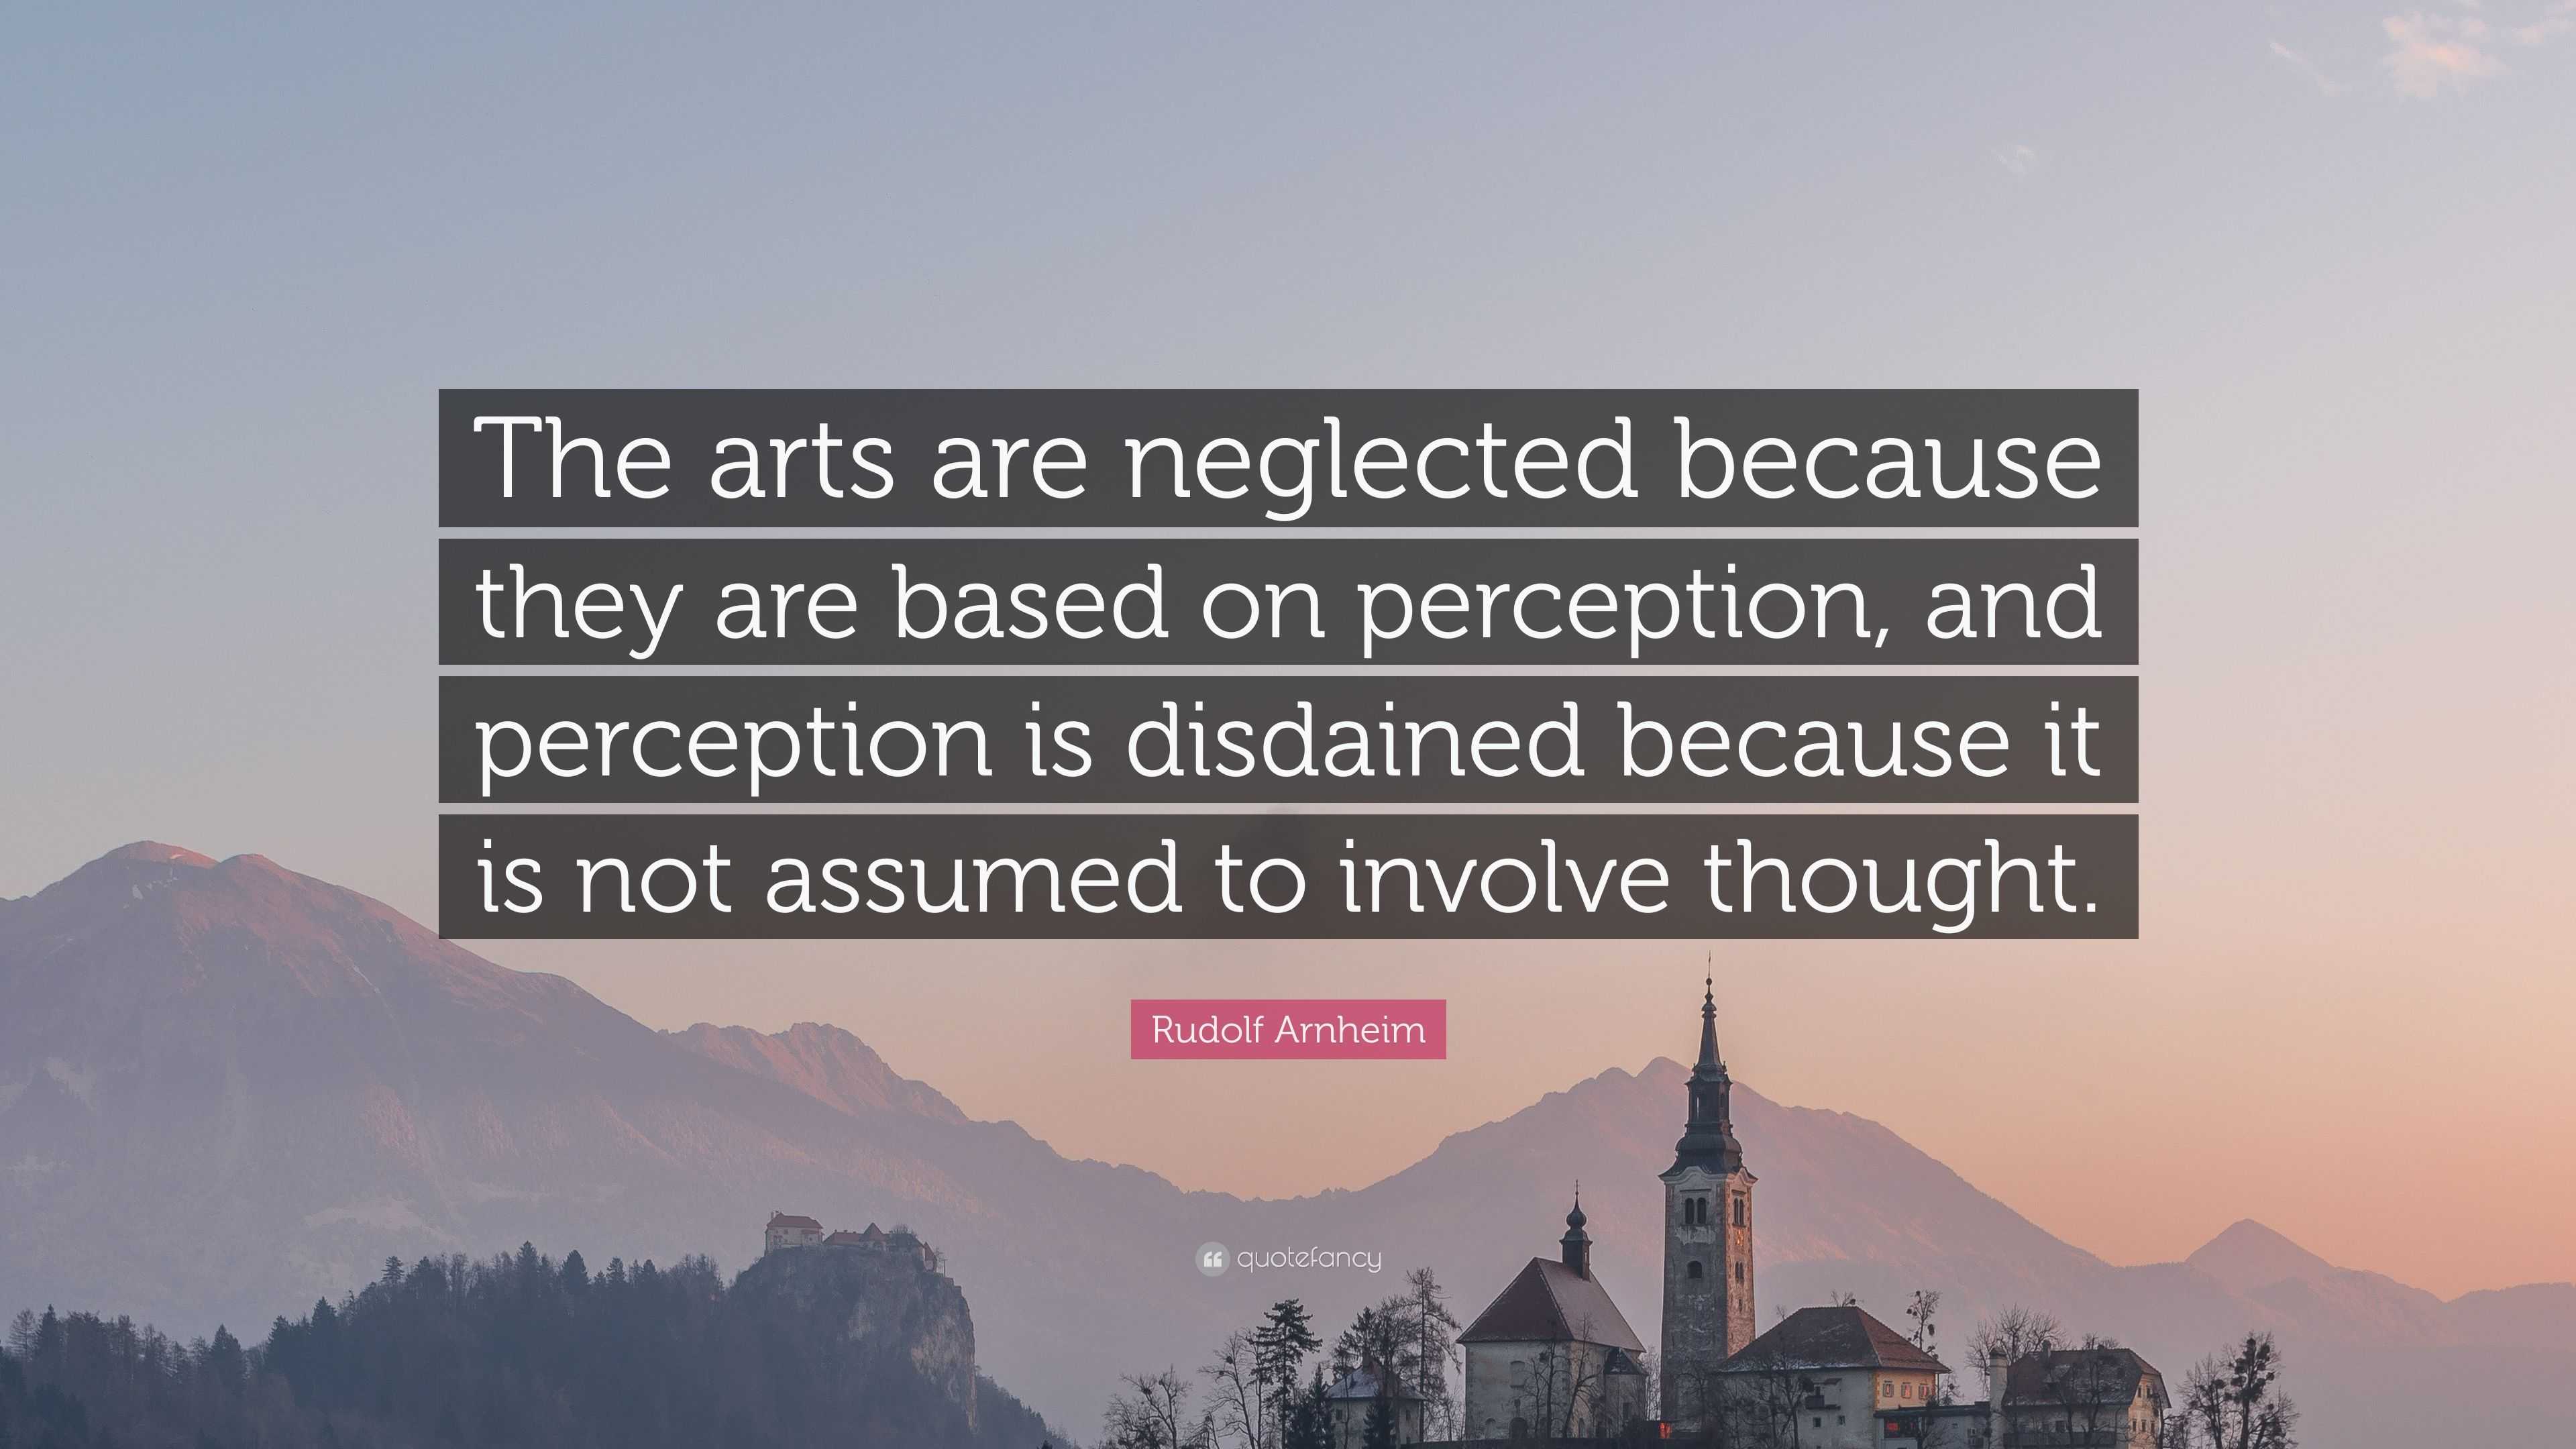 Rudolf Arnheim Quote: “The arts are neglected because they are based on ...